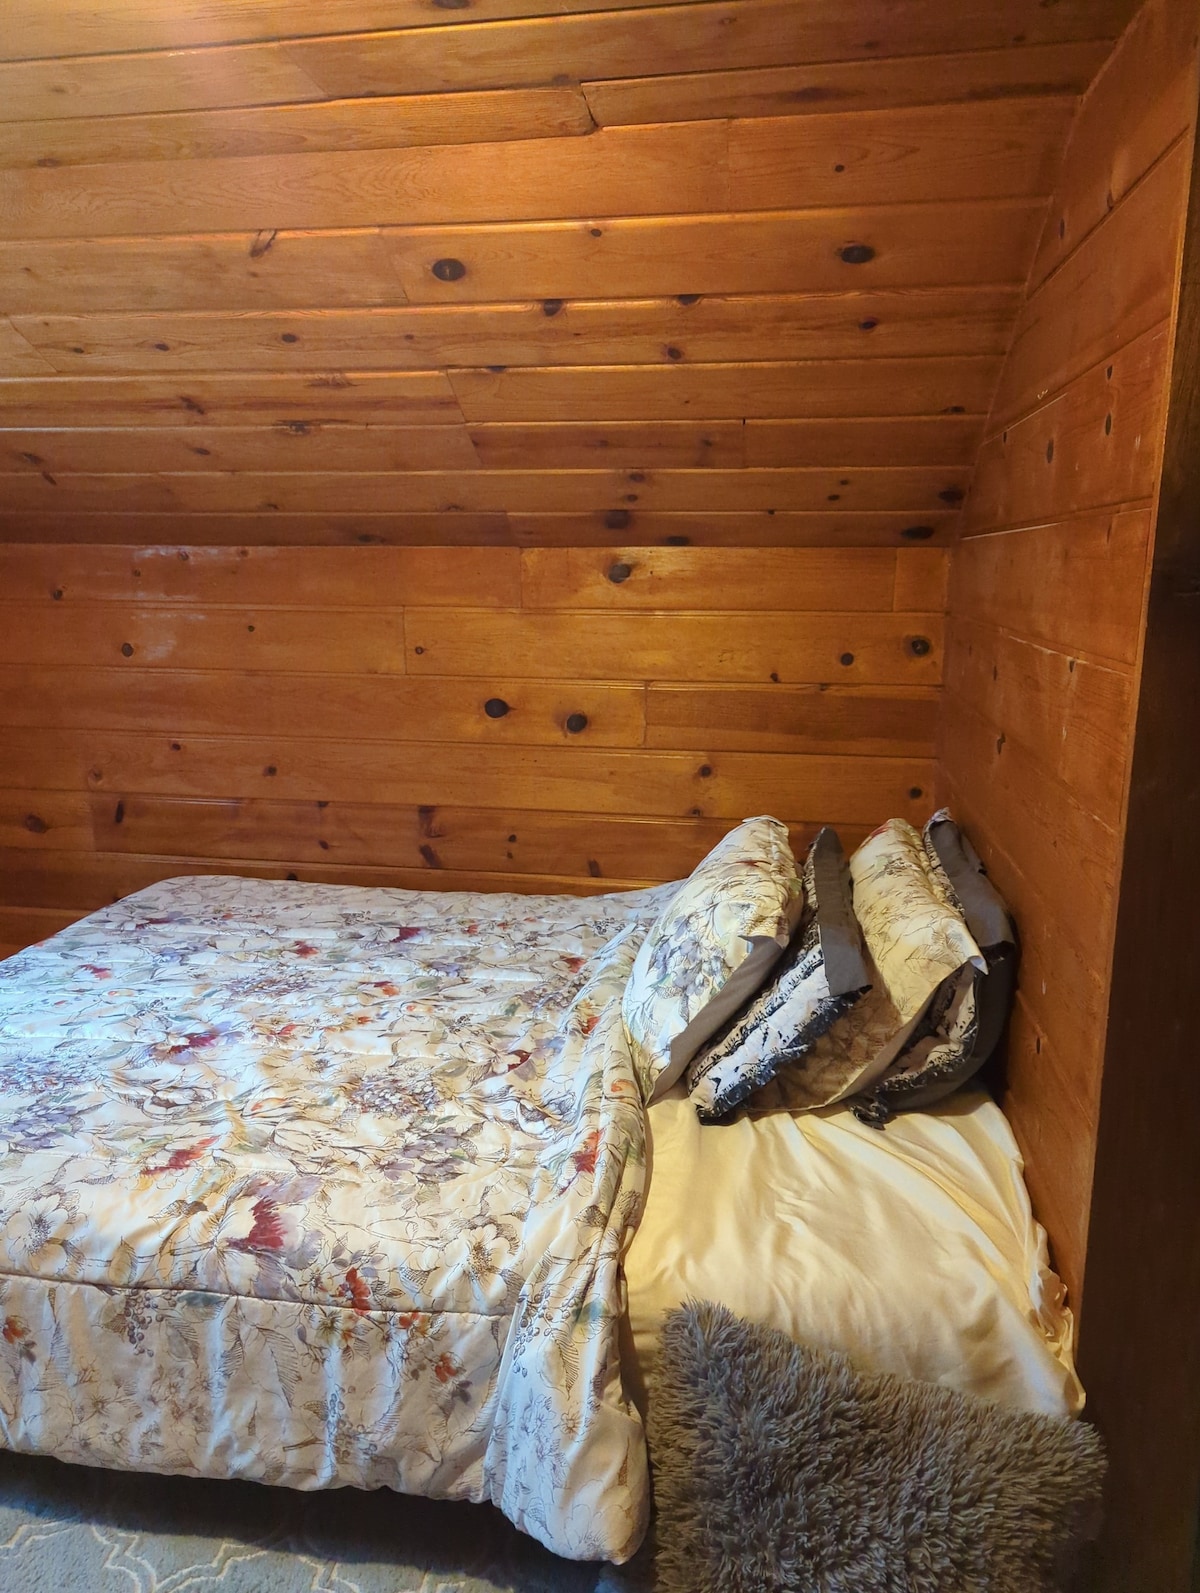 Peaceful cabin style one bedroom upstair.